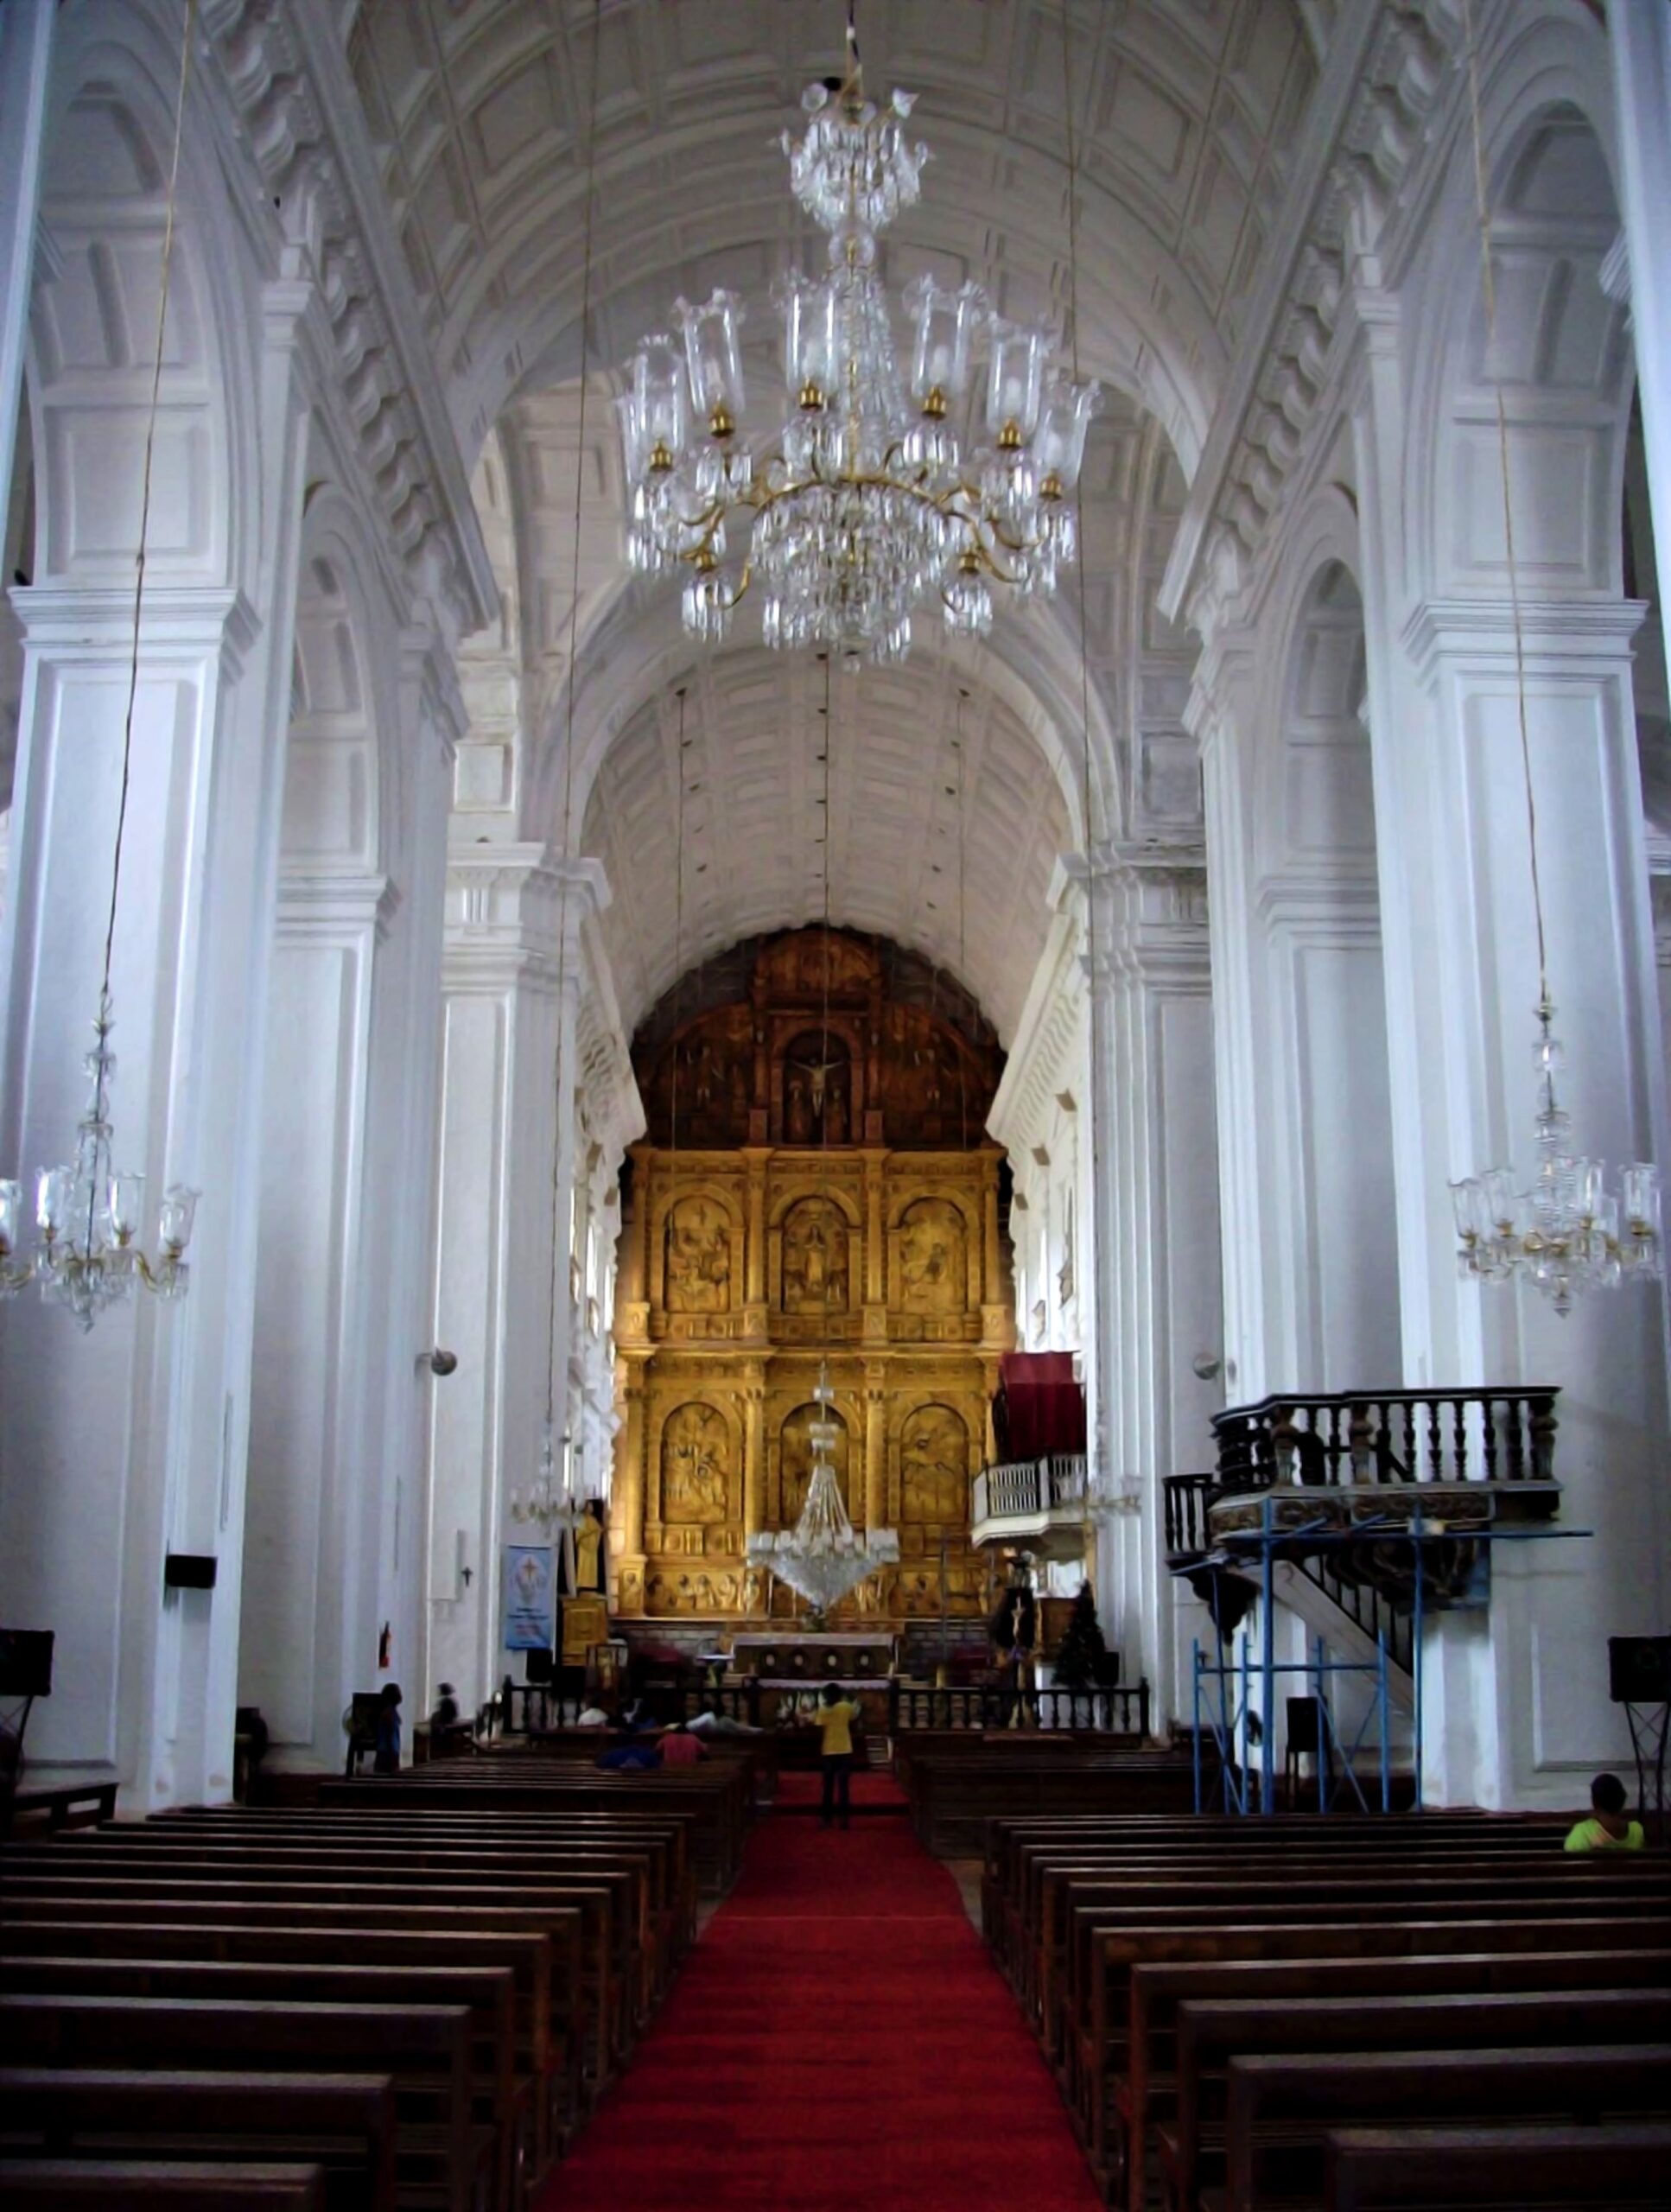 Interiors of Se Cathedral | PC - Wikimedia Commons